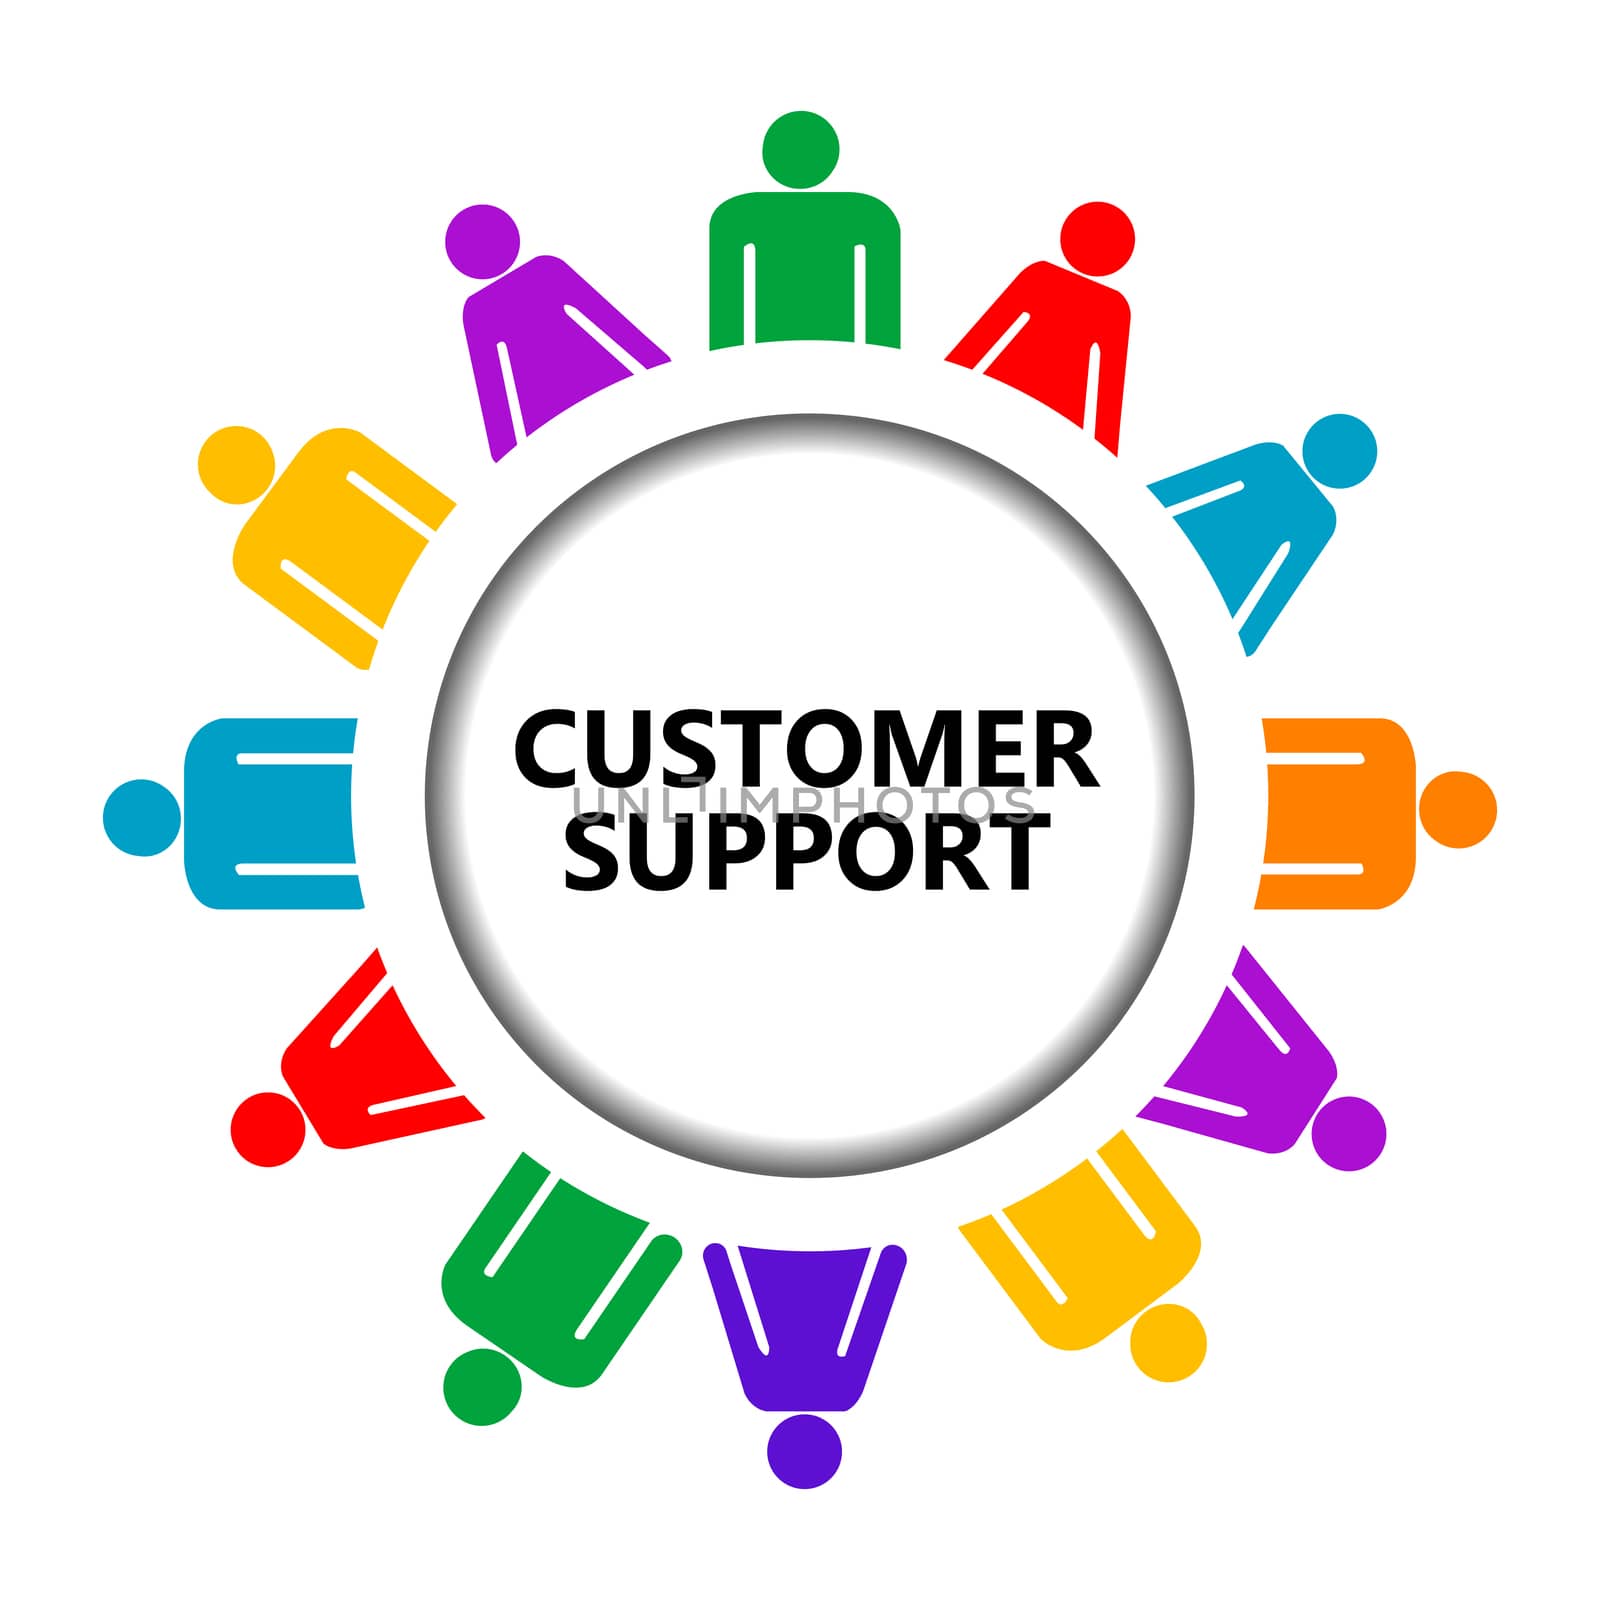 Customer support icon by hibrida13